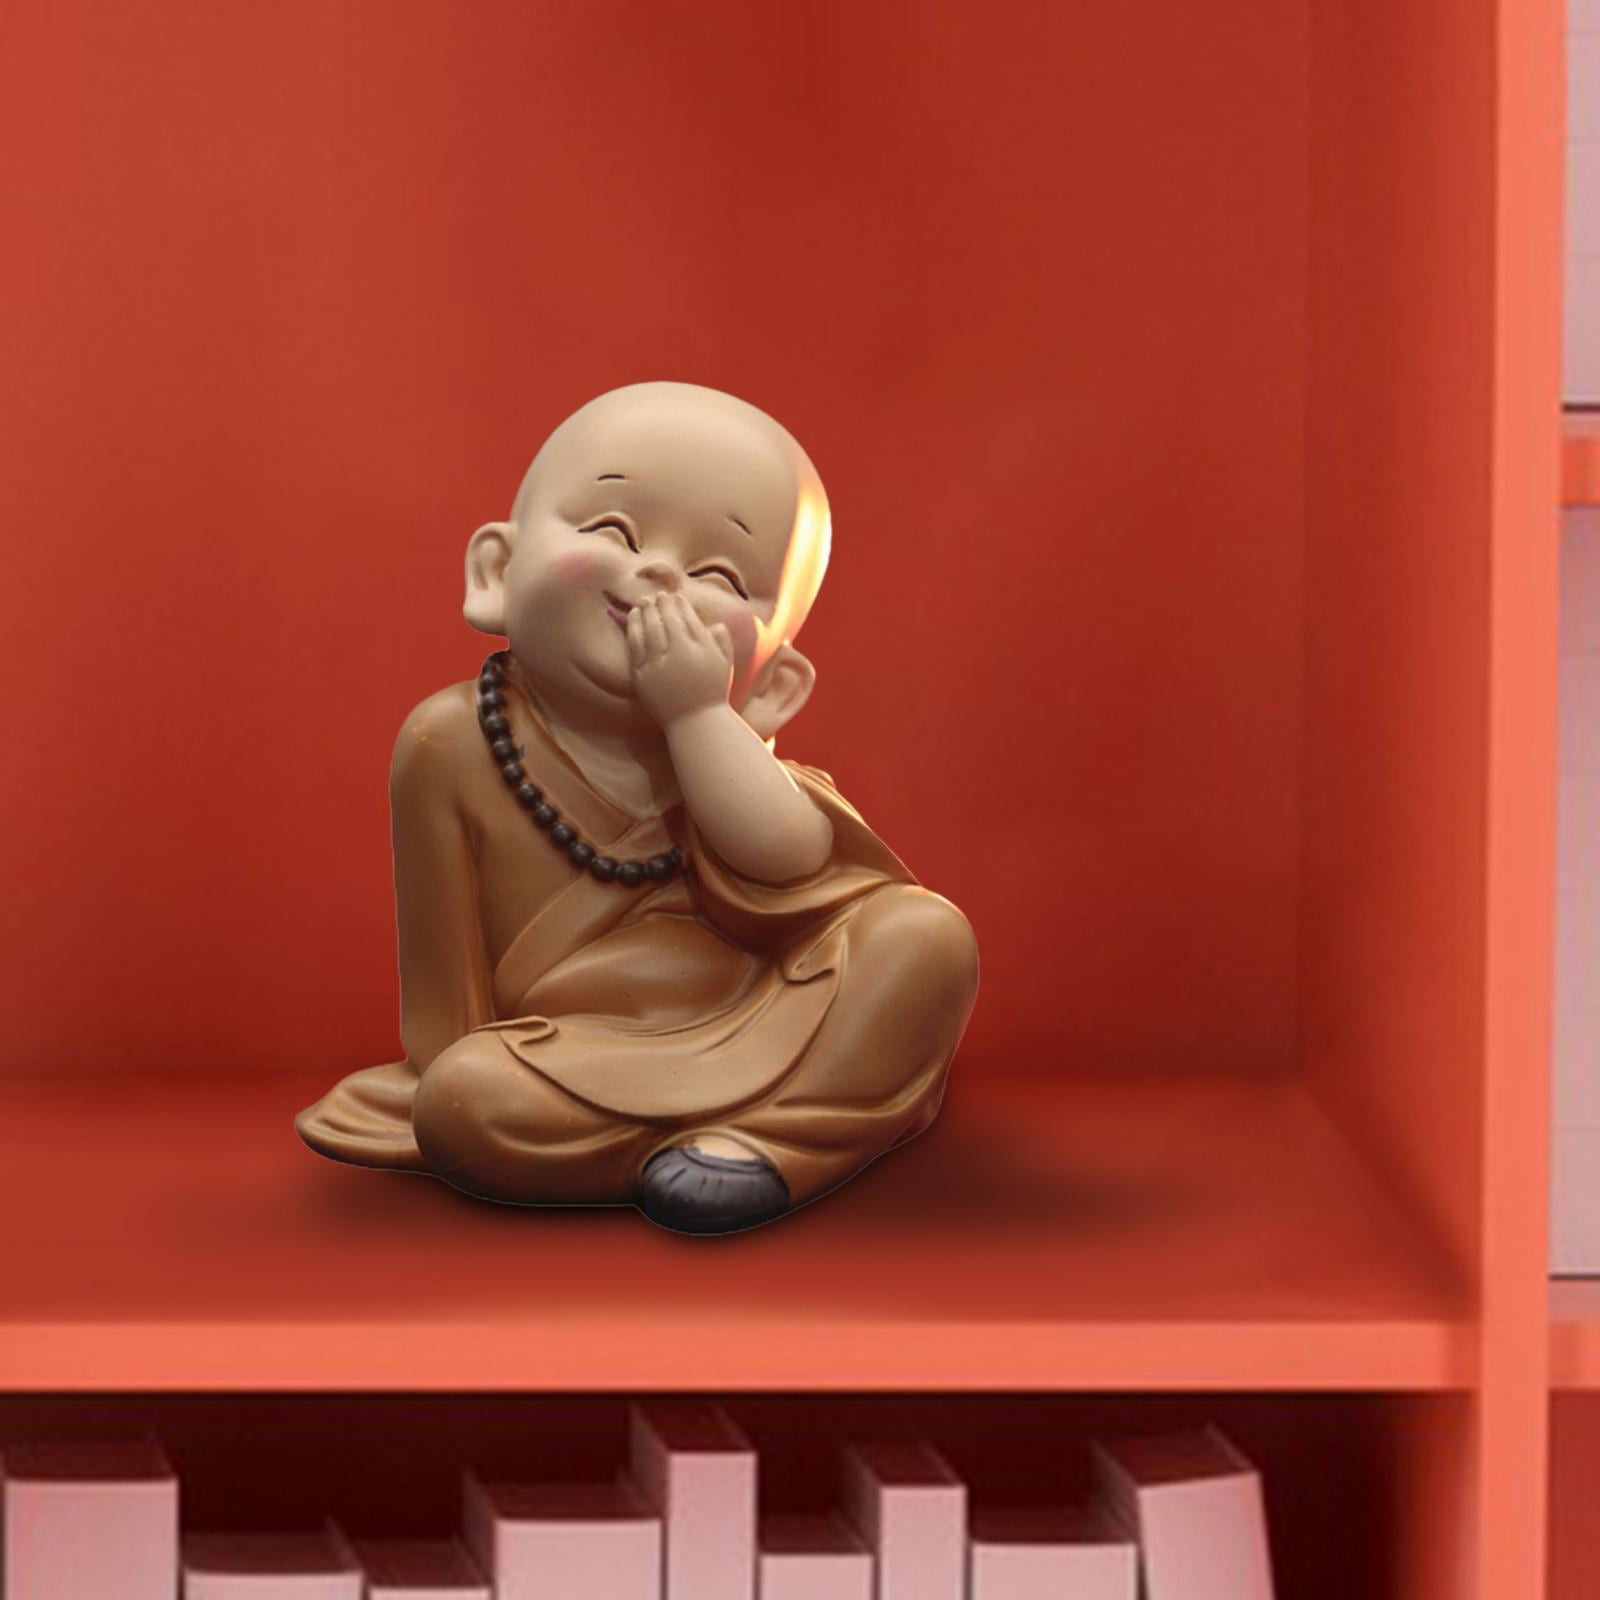 Crafts Dolls Housewarming for Statue Monk laugh Gifts mouth cover Baby Buddha Figurine Small